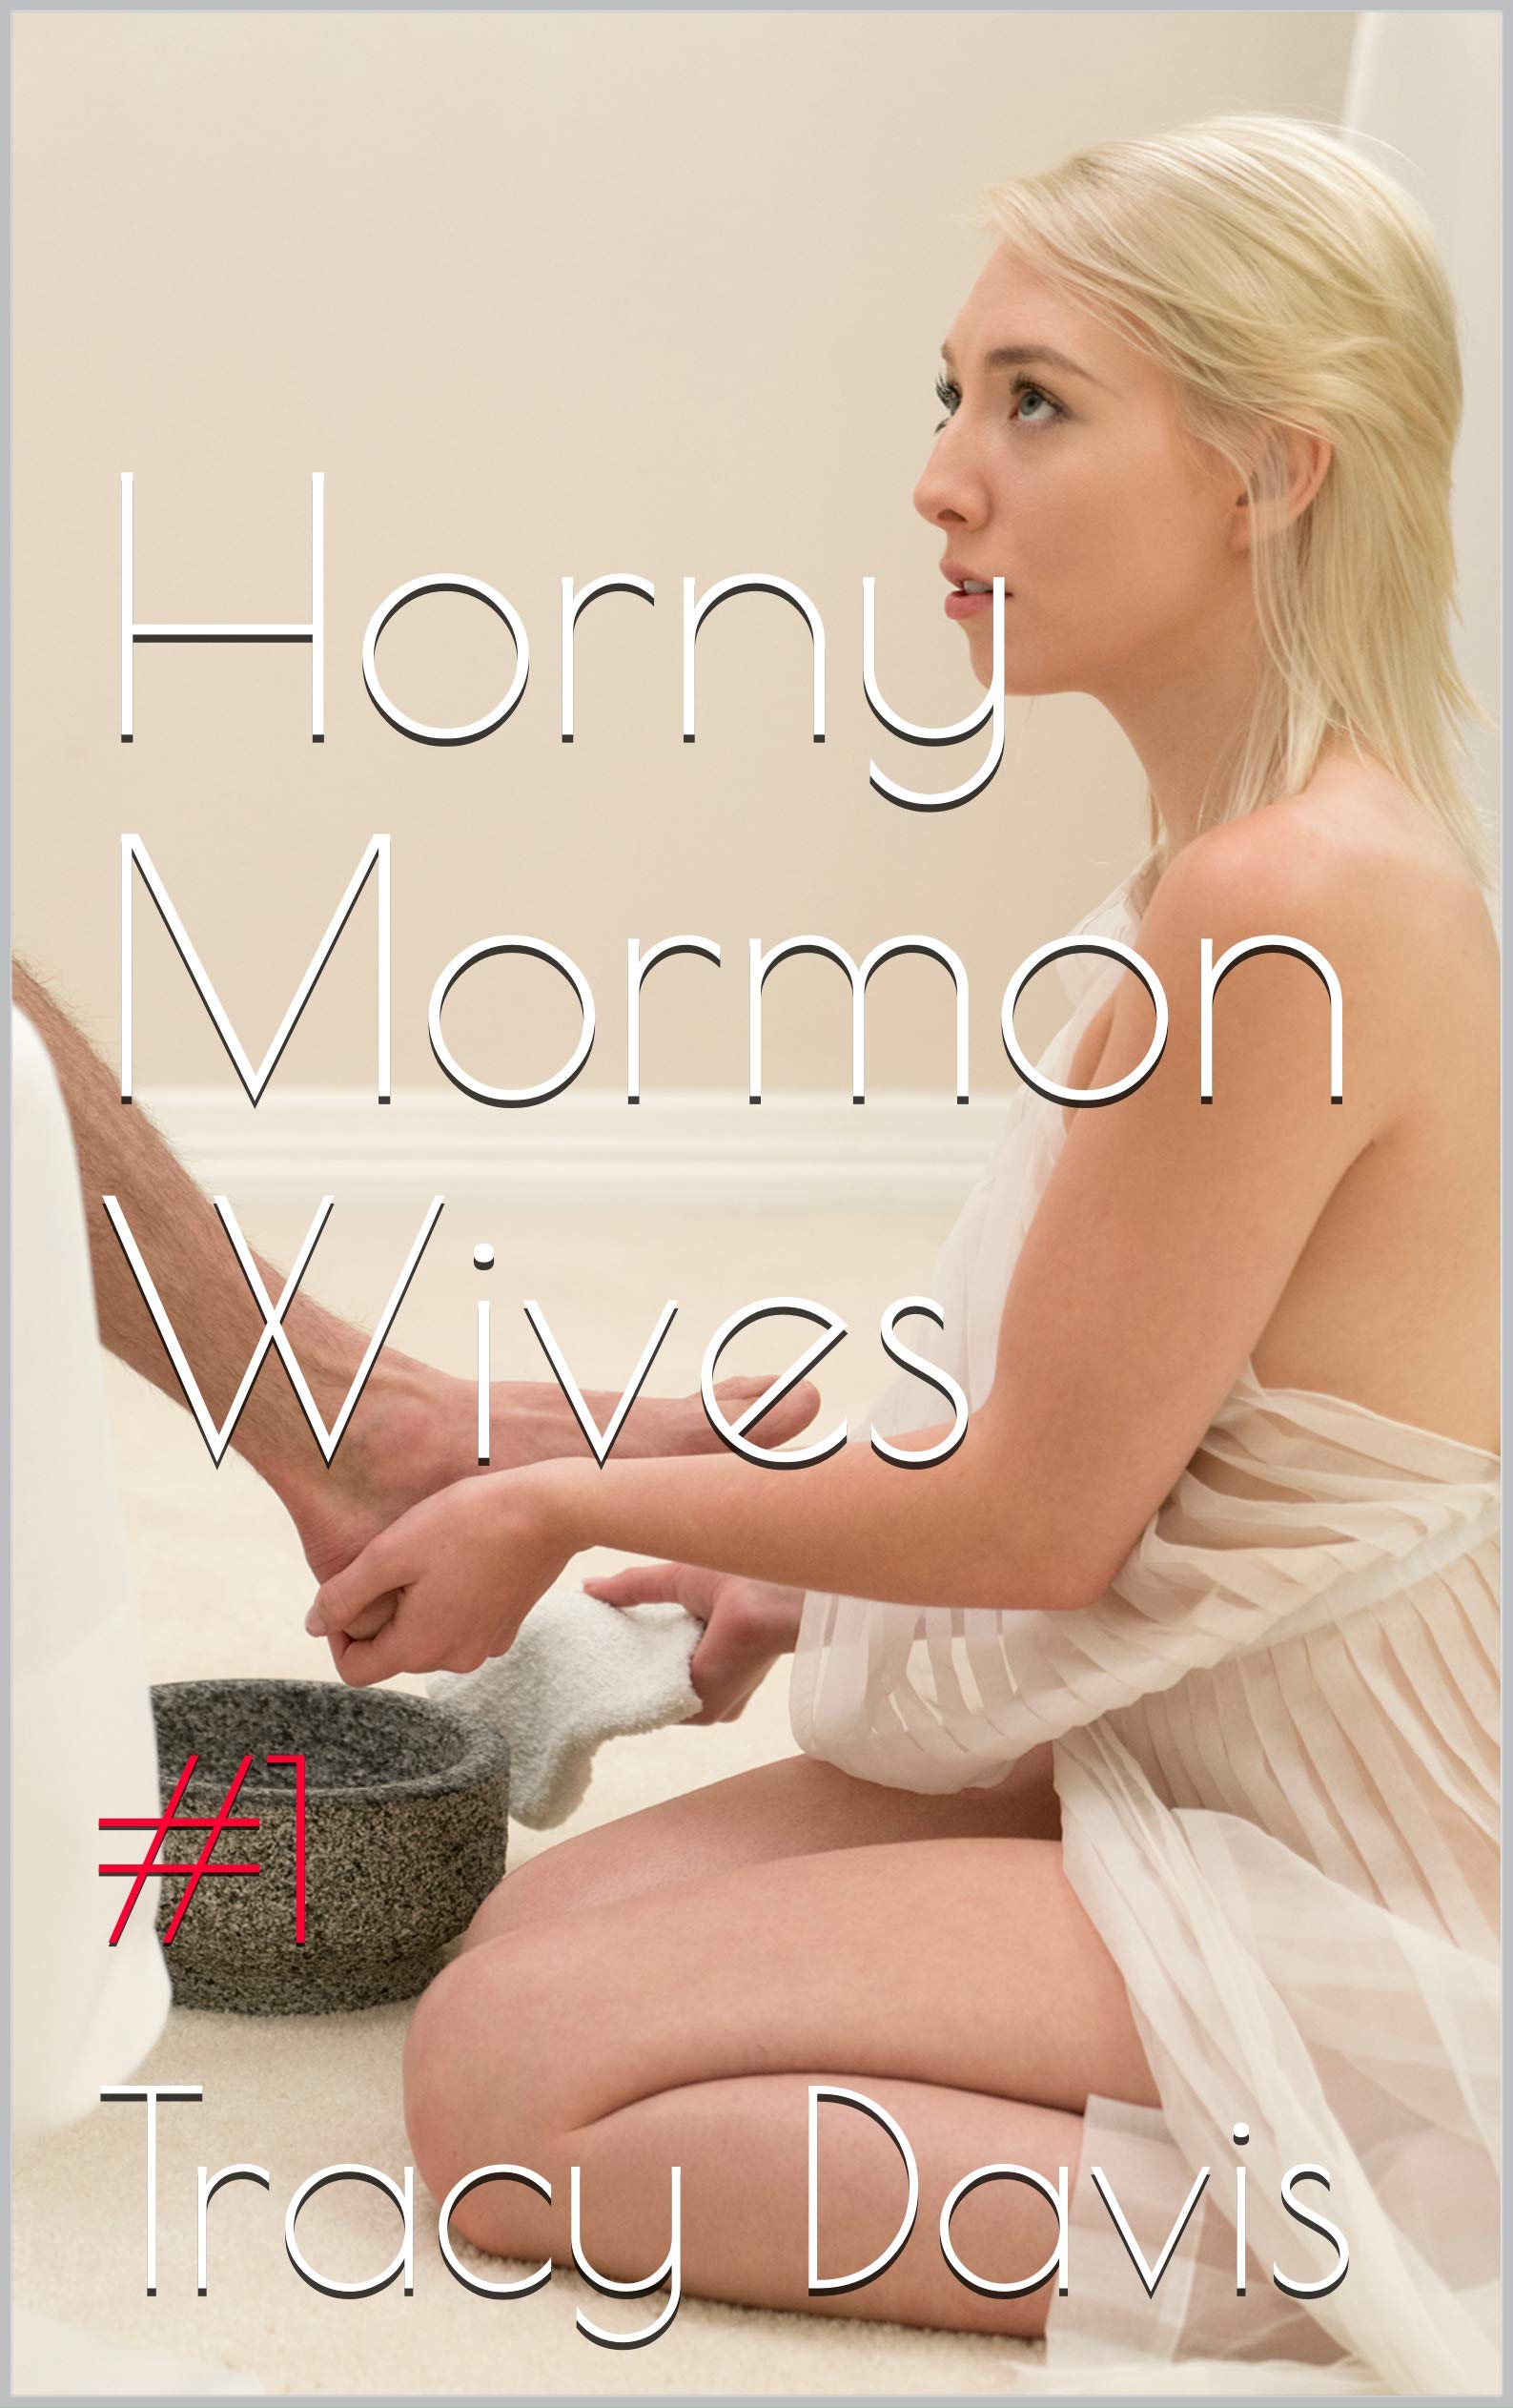 andrew magnusson recommends hot mormon wife pic